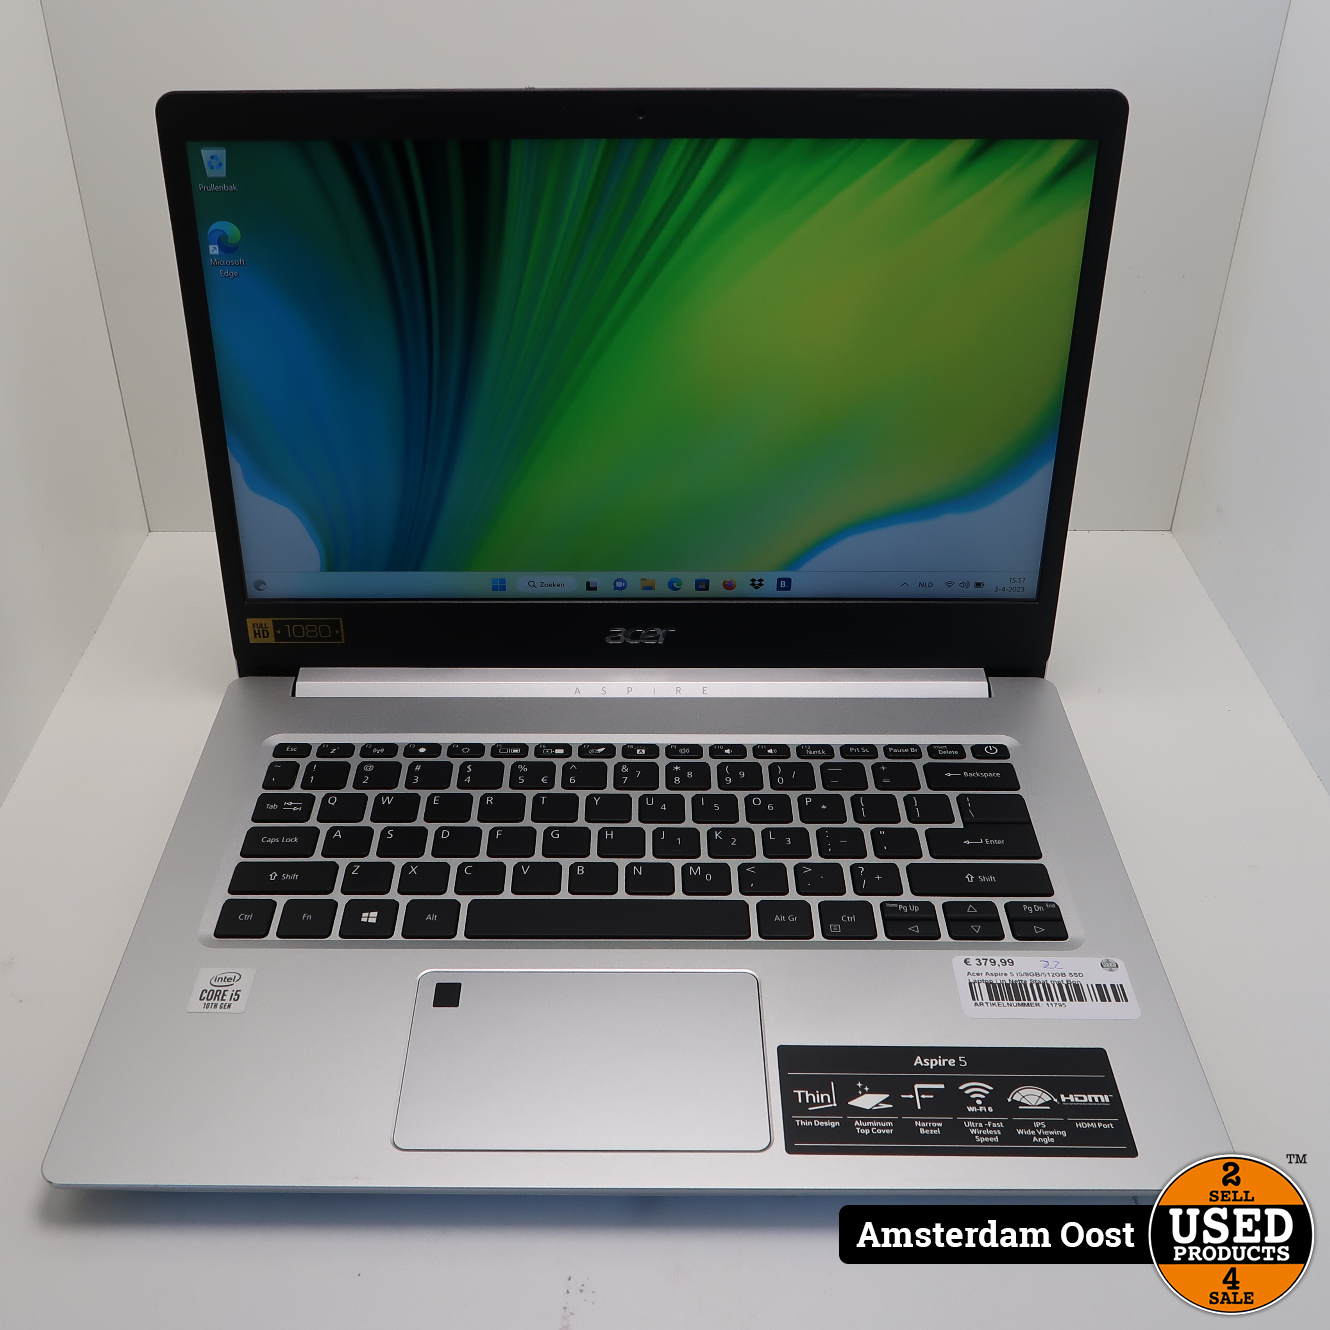 Investeren Veel software Acer Aspire 5 i5/8GB/512GB SSD Laptop | in Nette Staat met Bon - Used  Products Amsterdam Oost